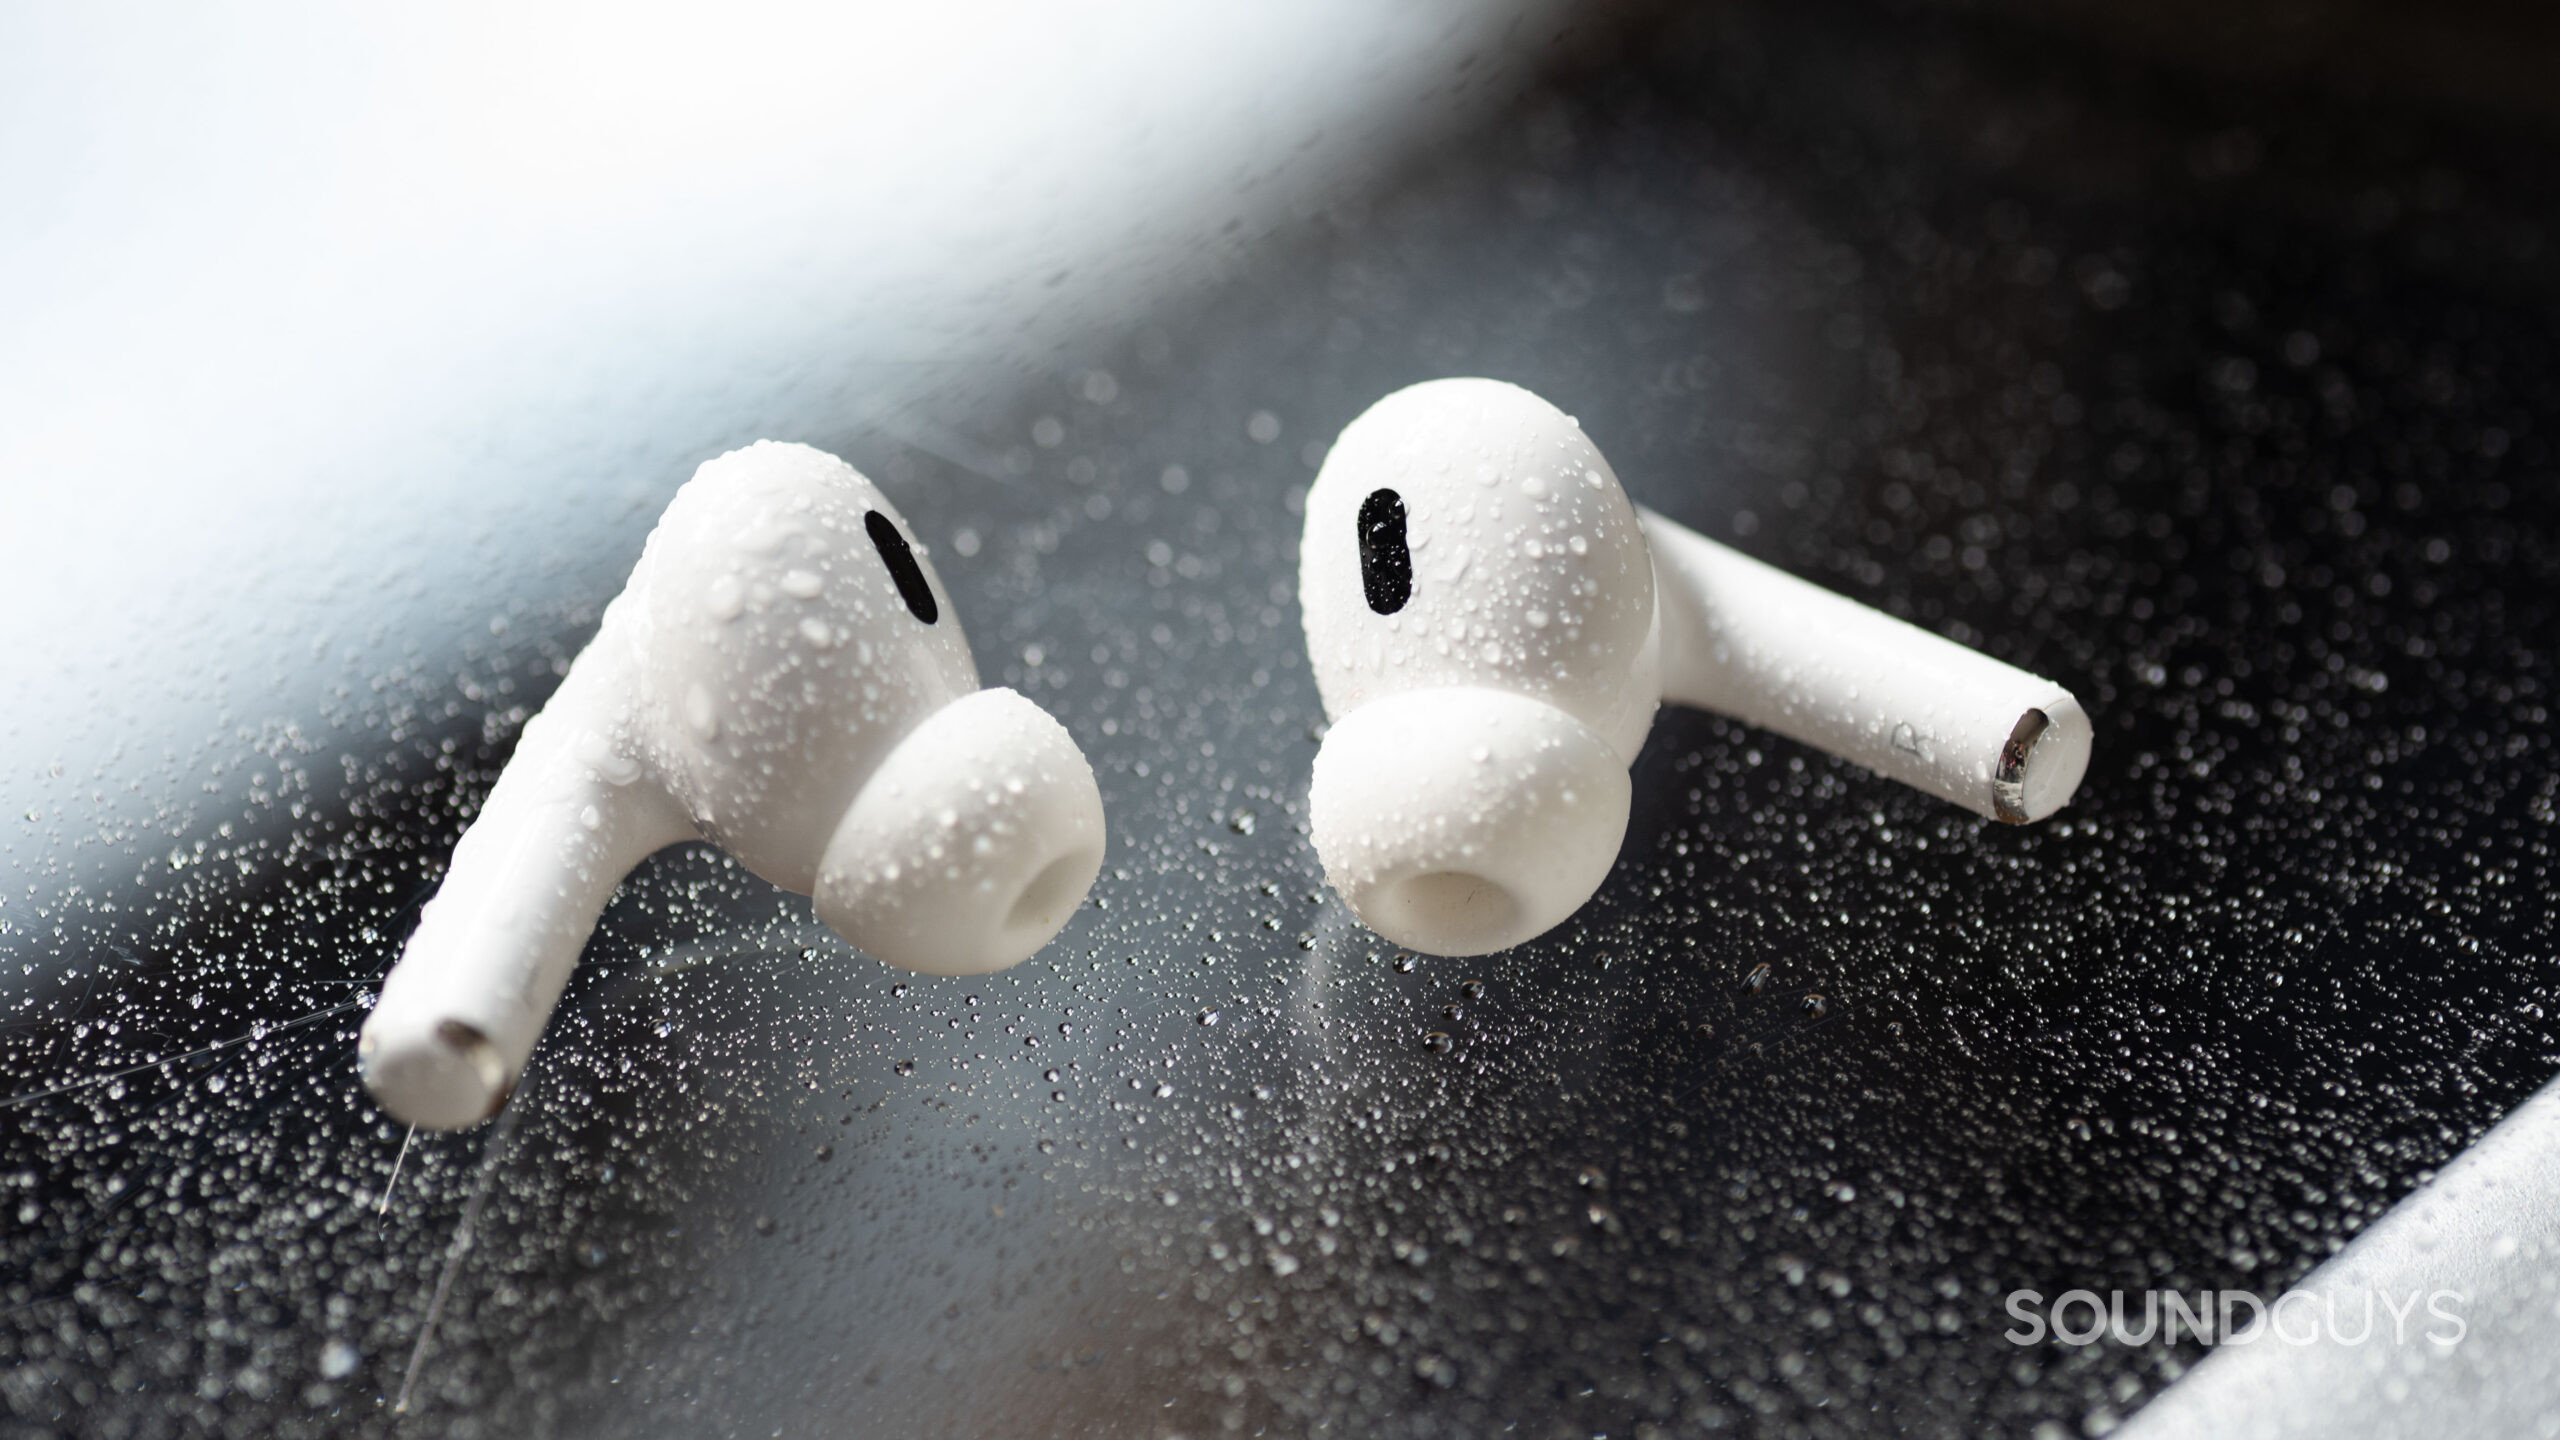 The AirPods Pro 2 with water droplets on them.